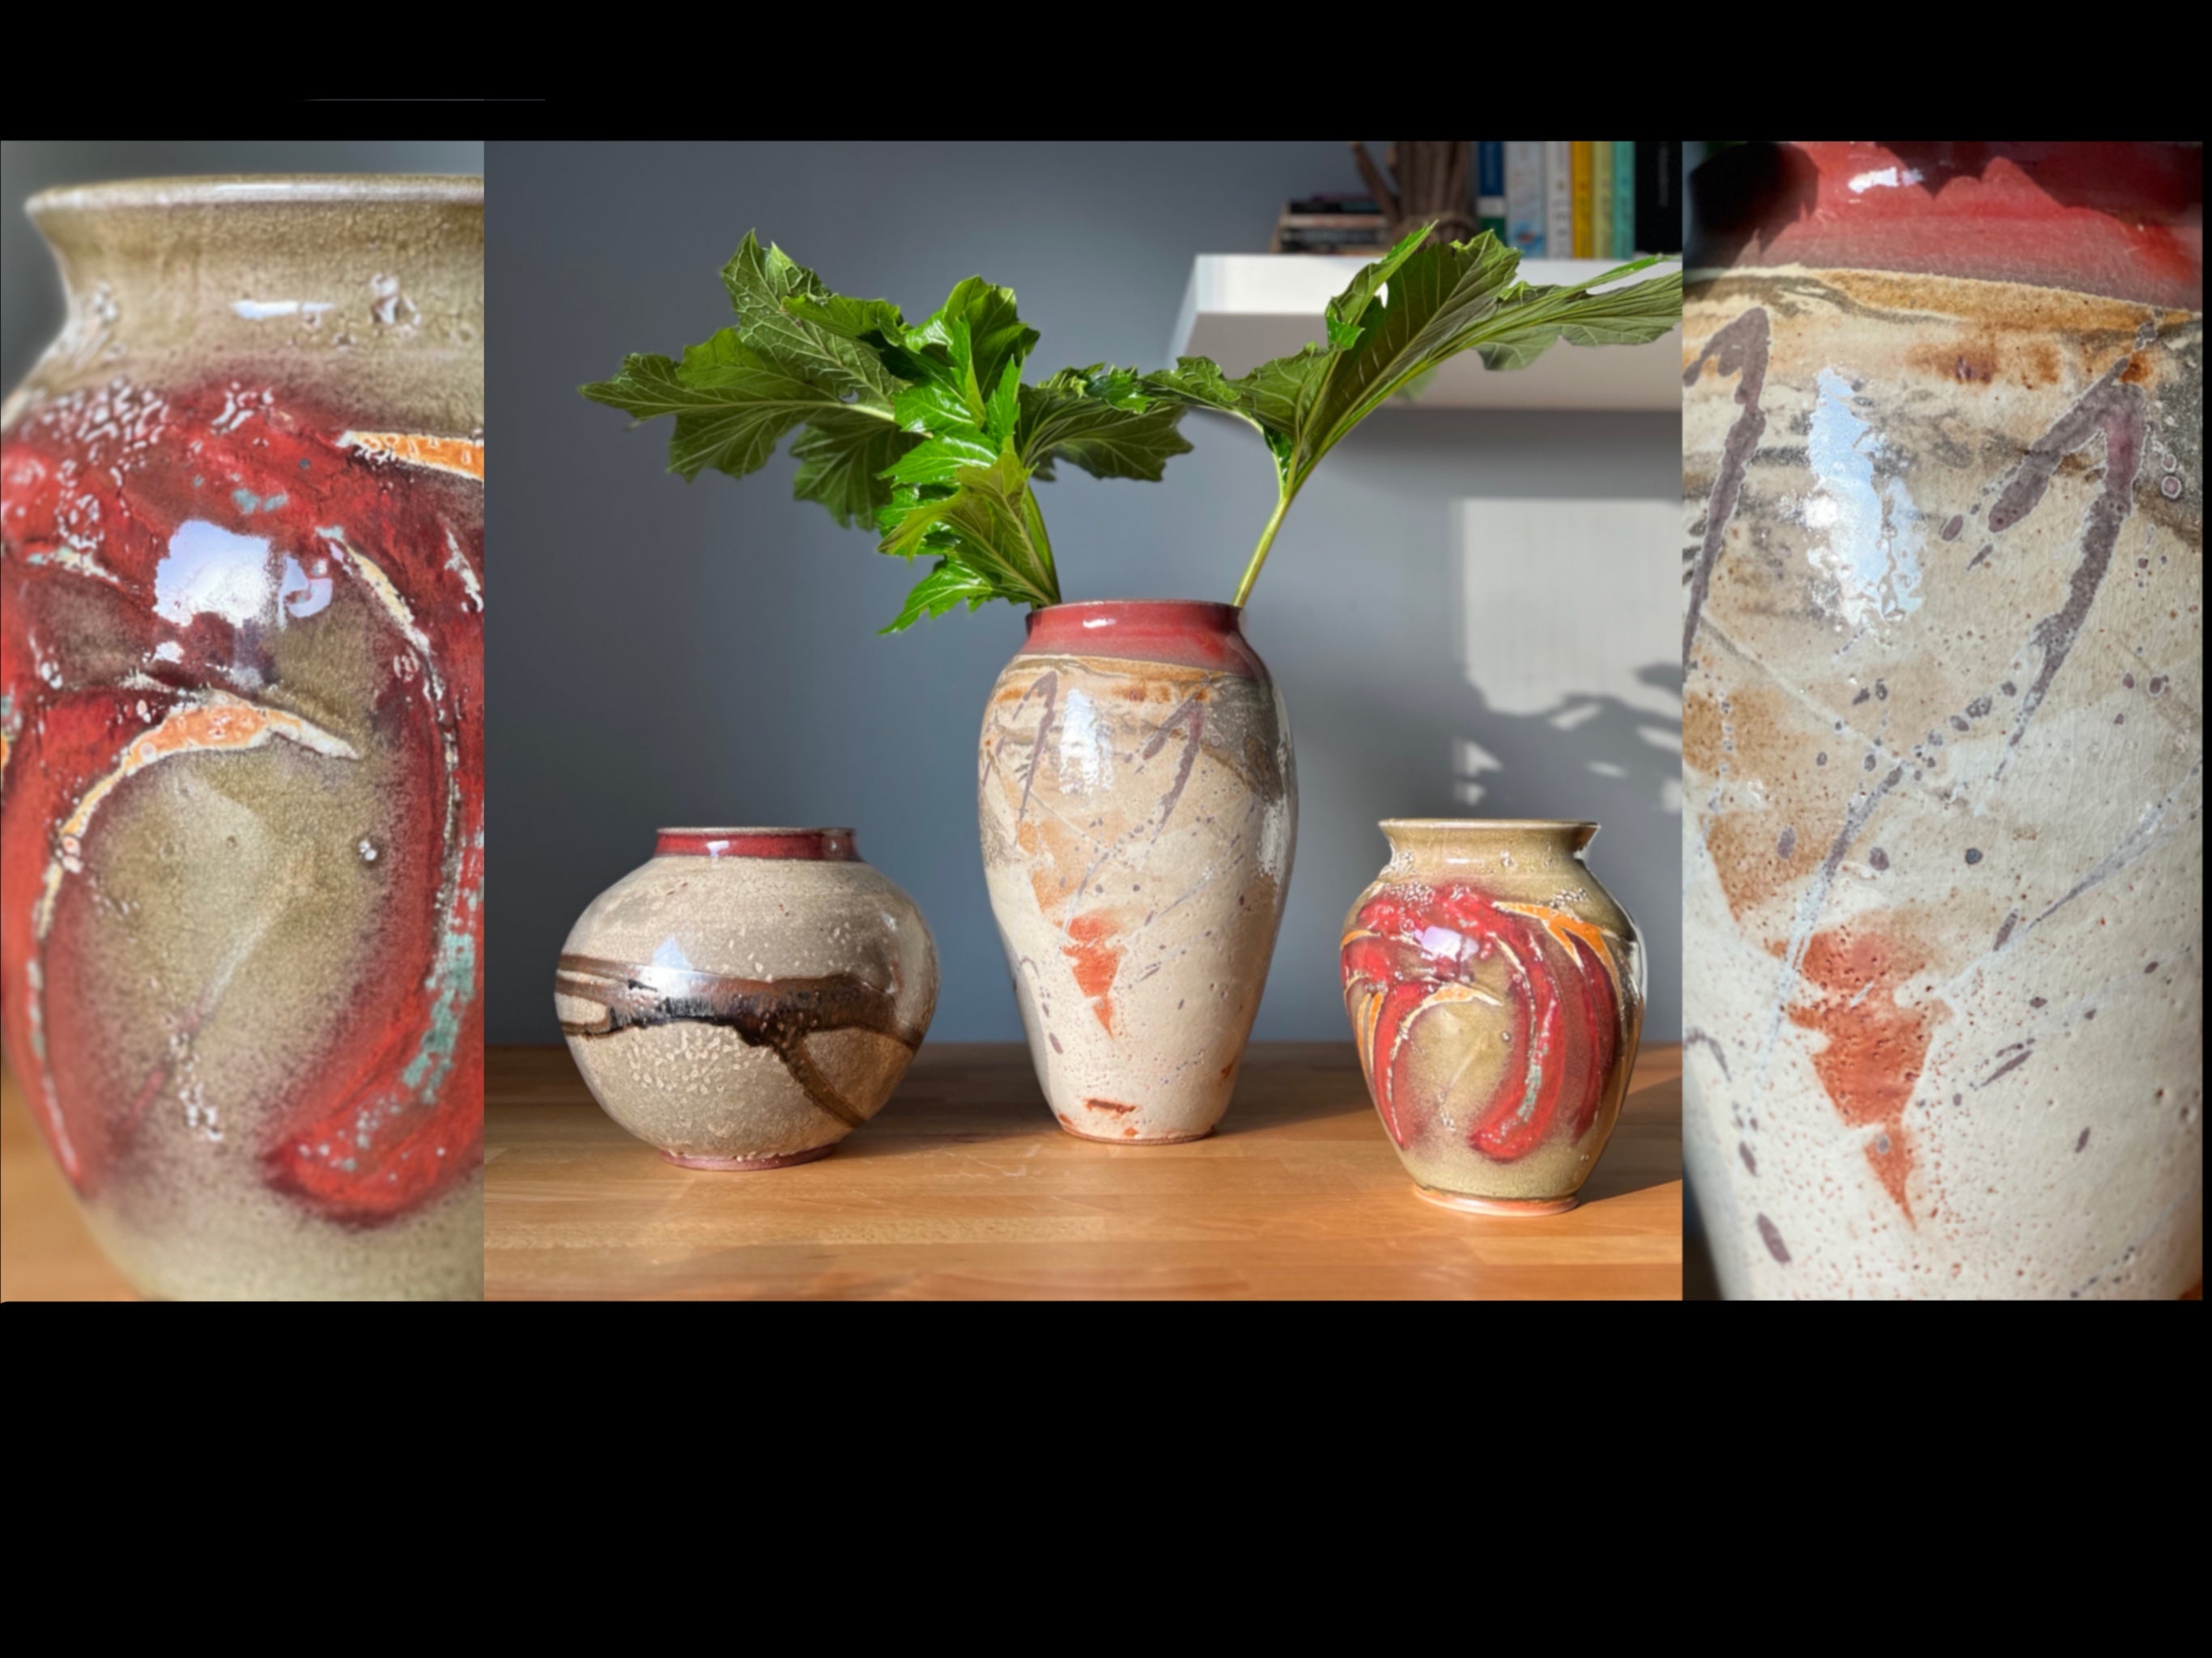 A set of three vases of different shapes, all with the same light brown color and accents of red.